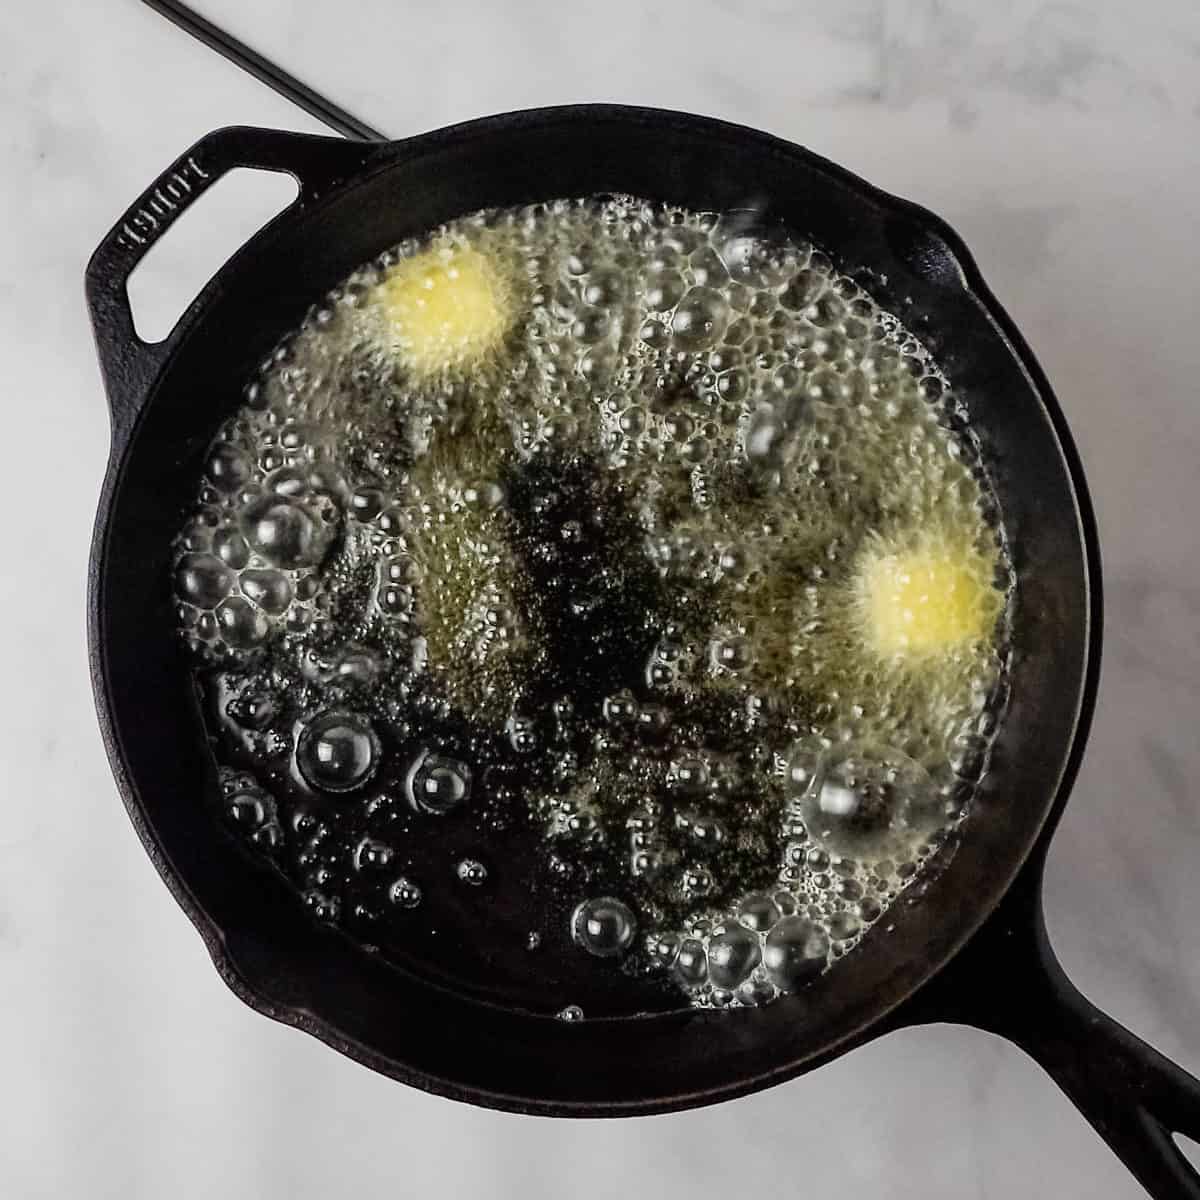 Cooking oil and butter heating up in a cast iron skillet.